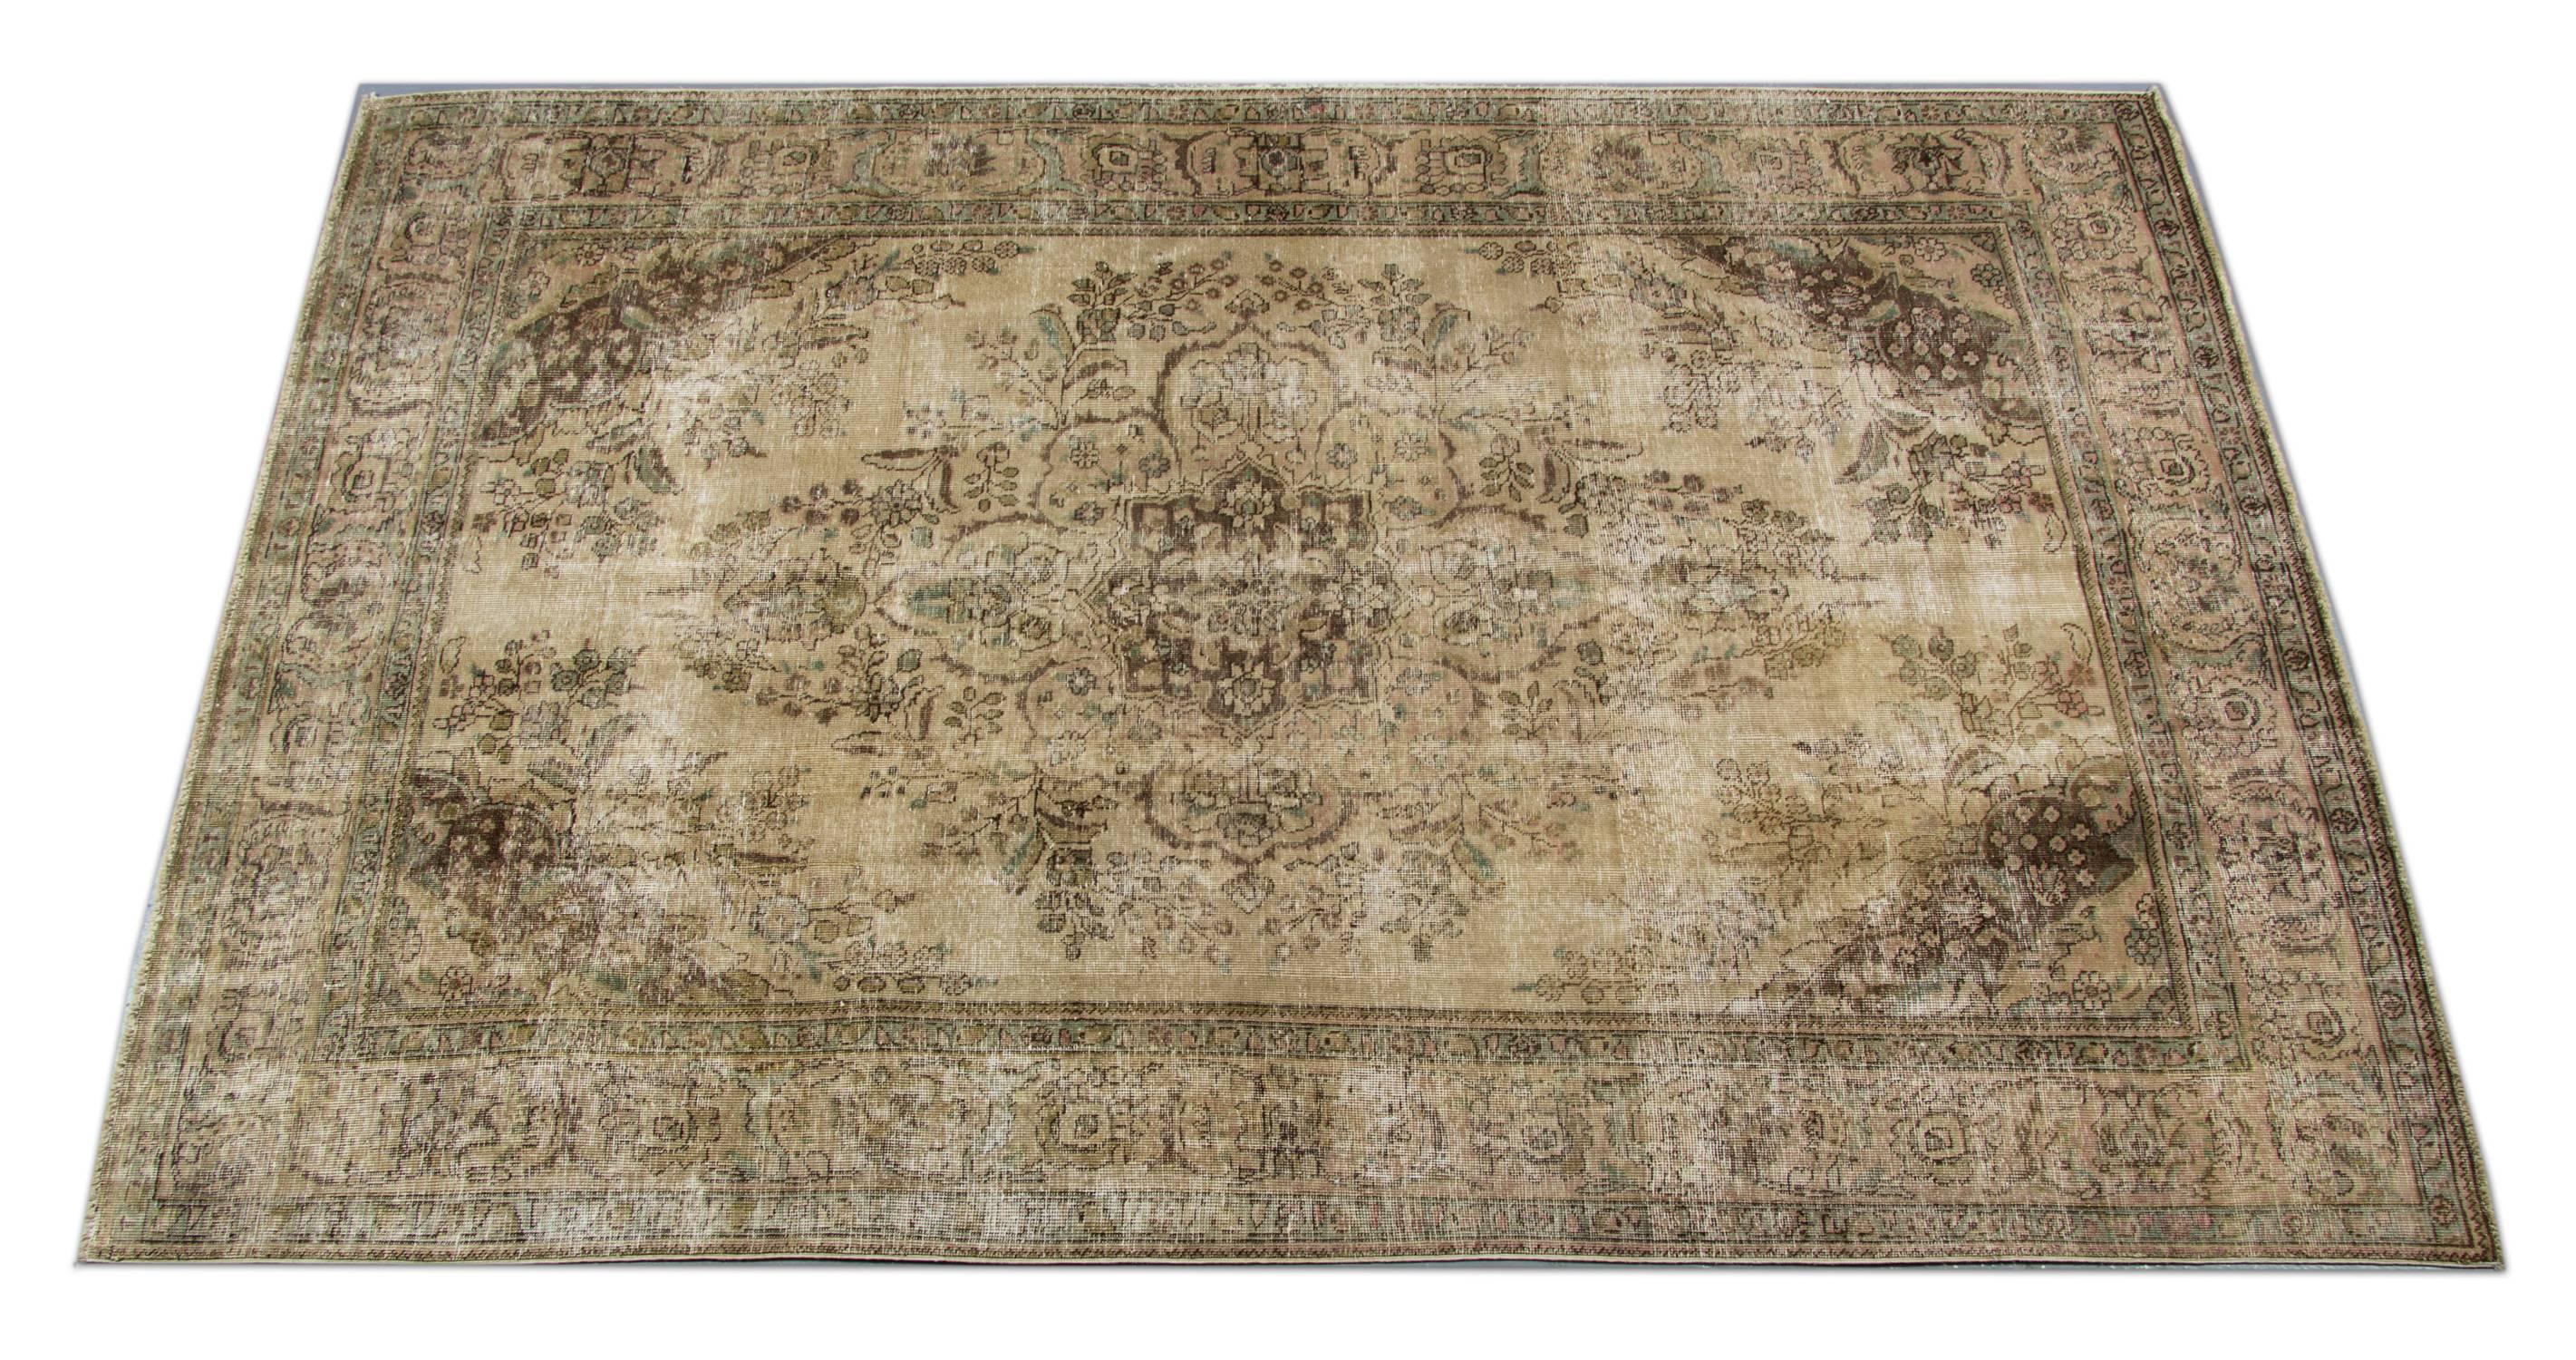 Colored vintage rugs have produced from old Persian carpets of at least 20-50 years of age. Each carpet is carefully selected and undergoes a unique process of colour neutralization before being over-dyed in an exciting new colour. The result is a